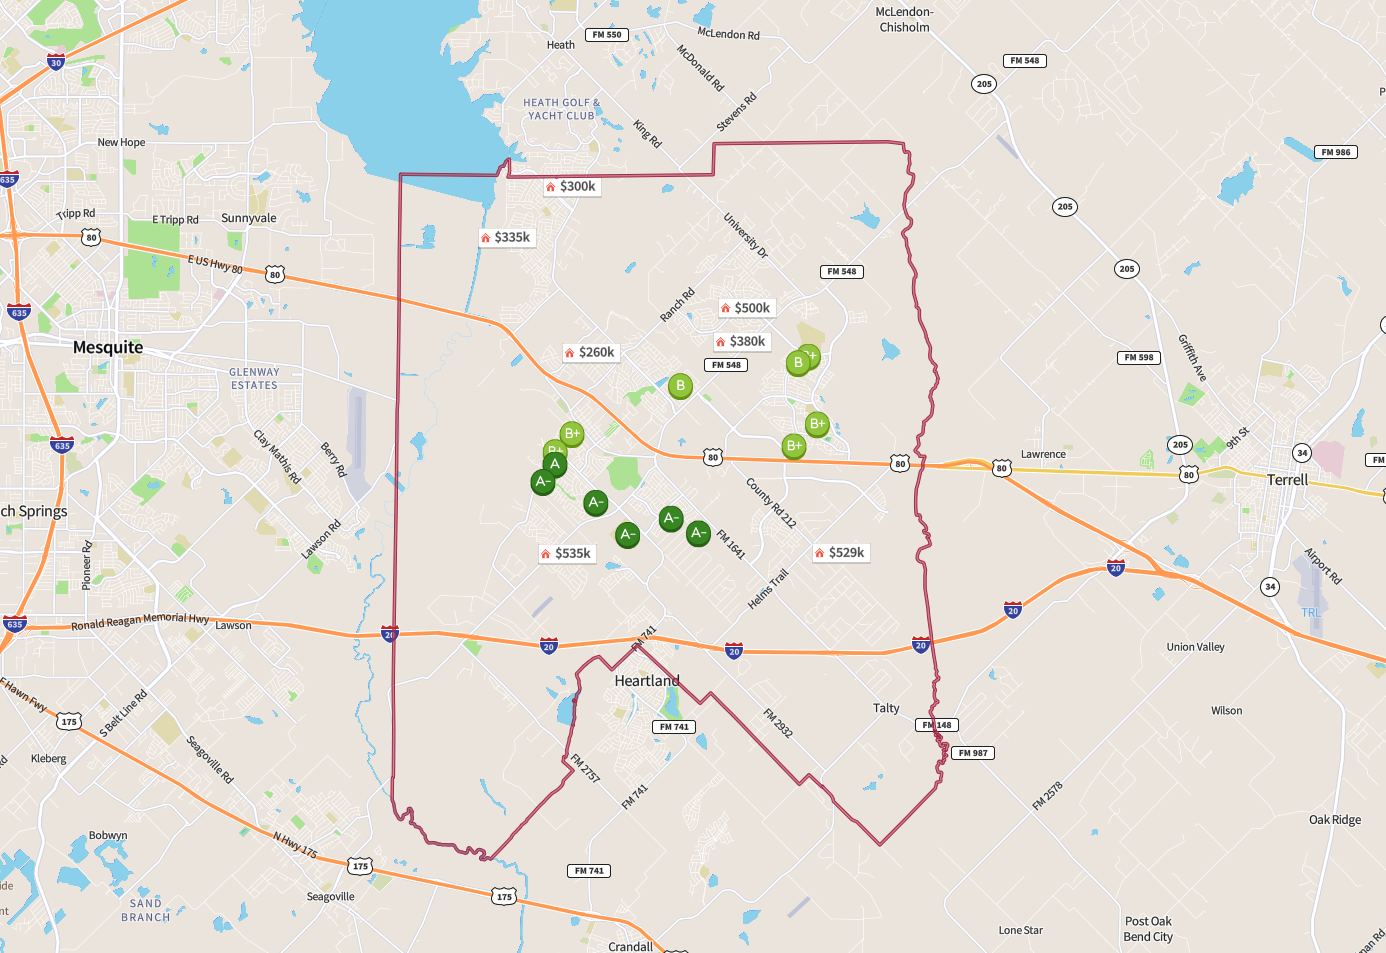 Forney ISD Map of Schools.png